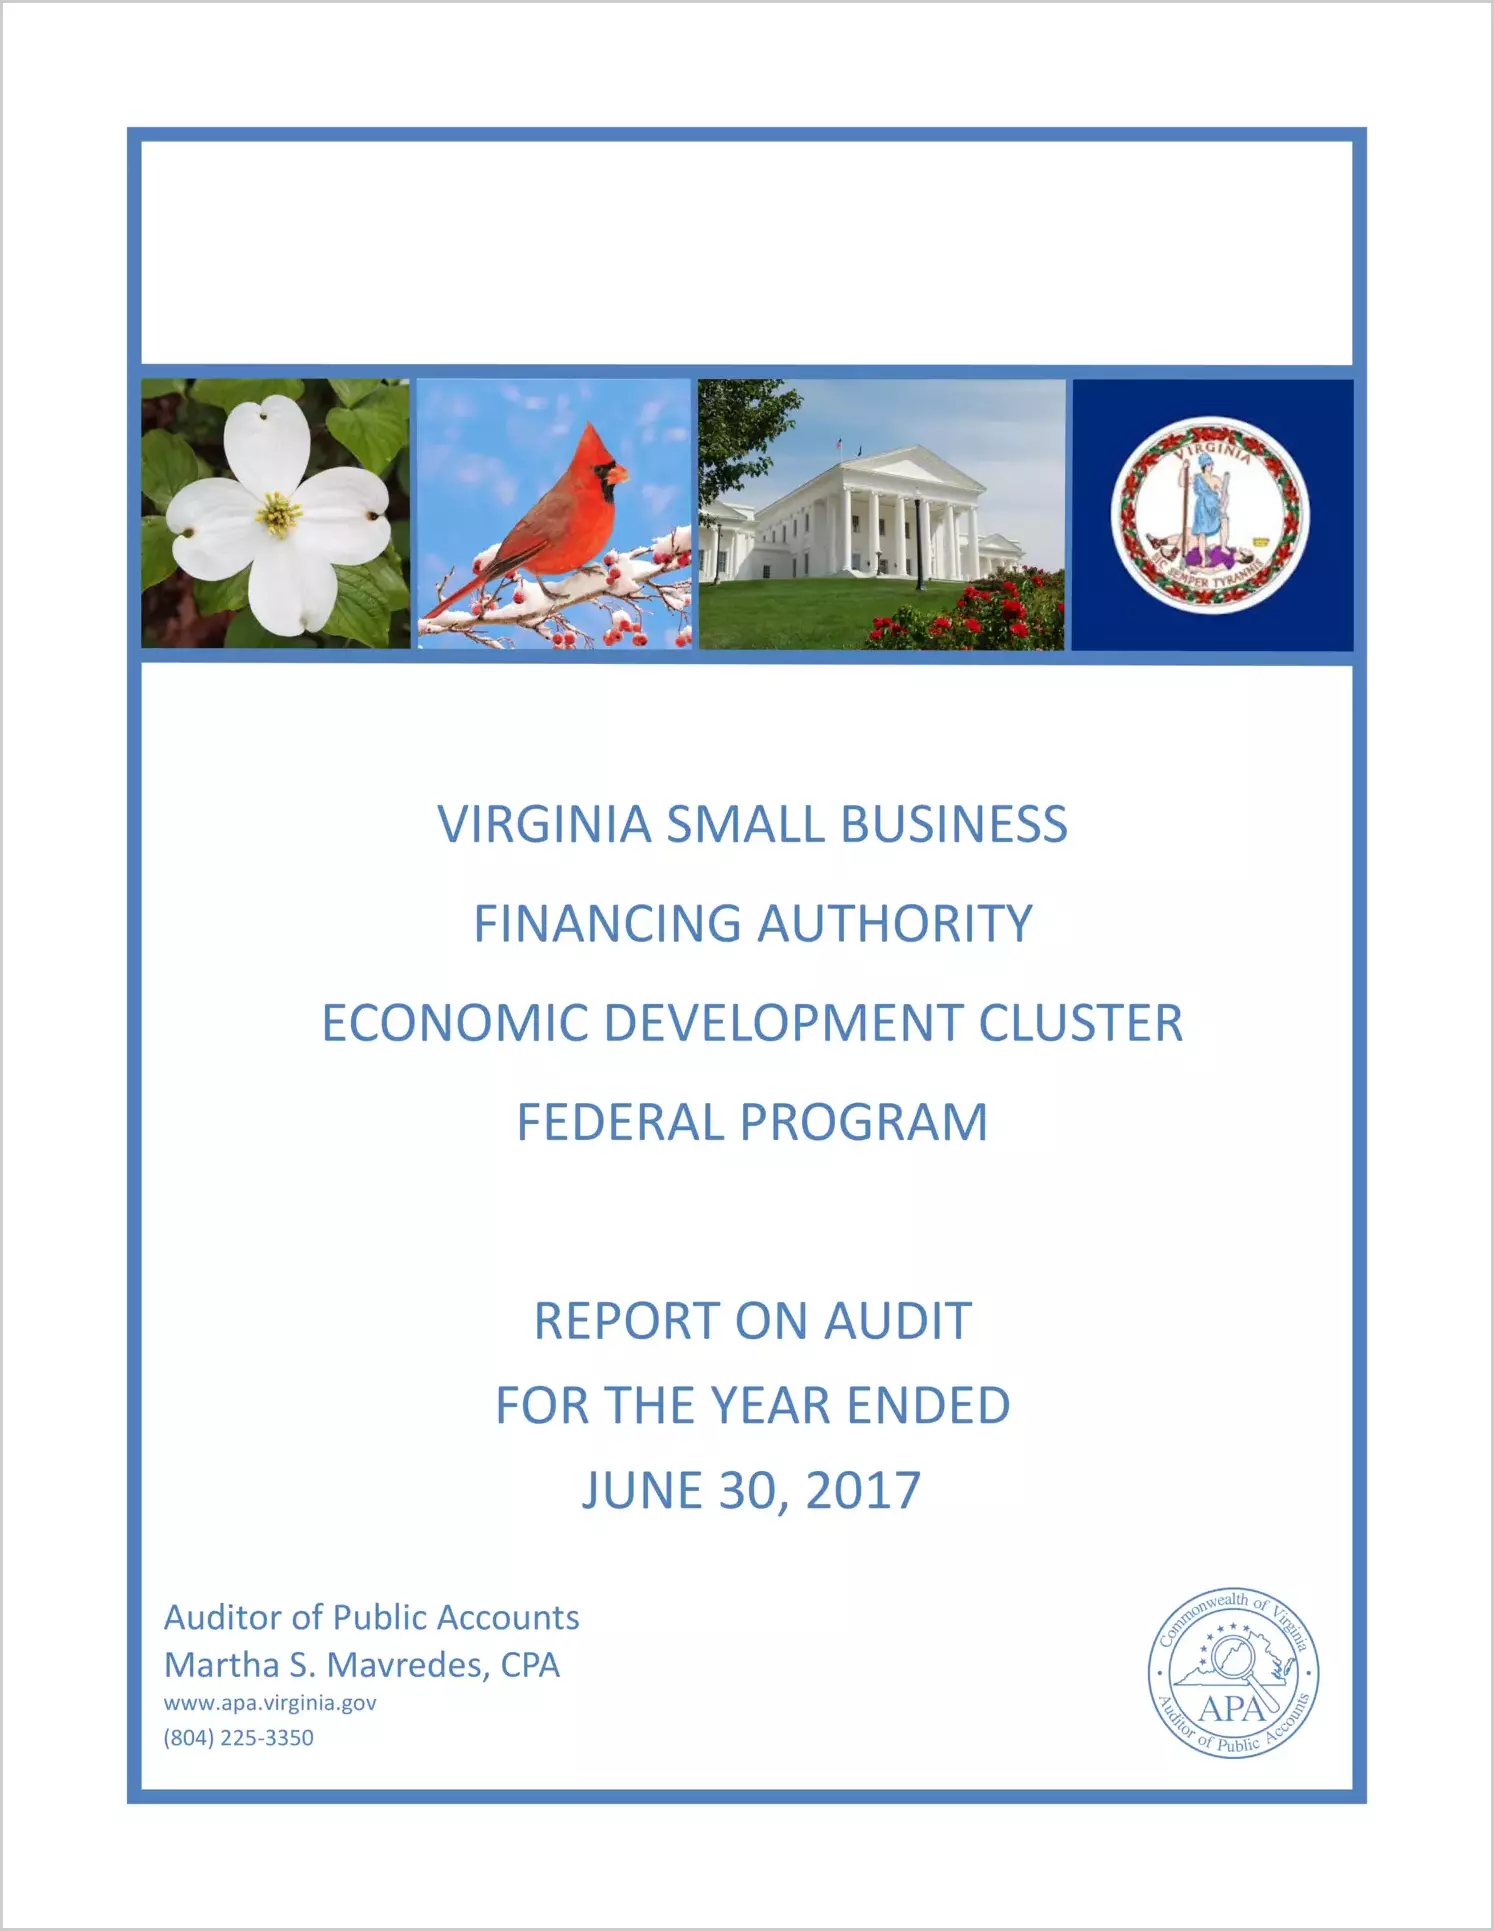 Virginia Small Business Financing Authority Economic Development Cluster Federal Program for the year ended June 30, 2017